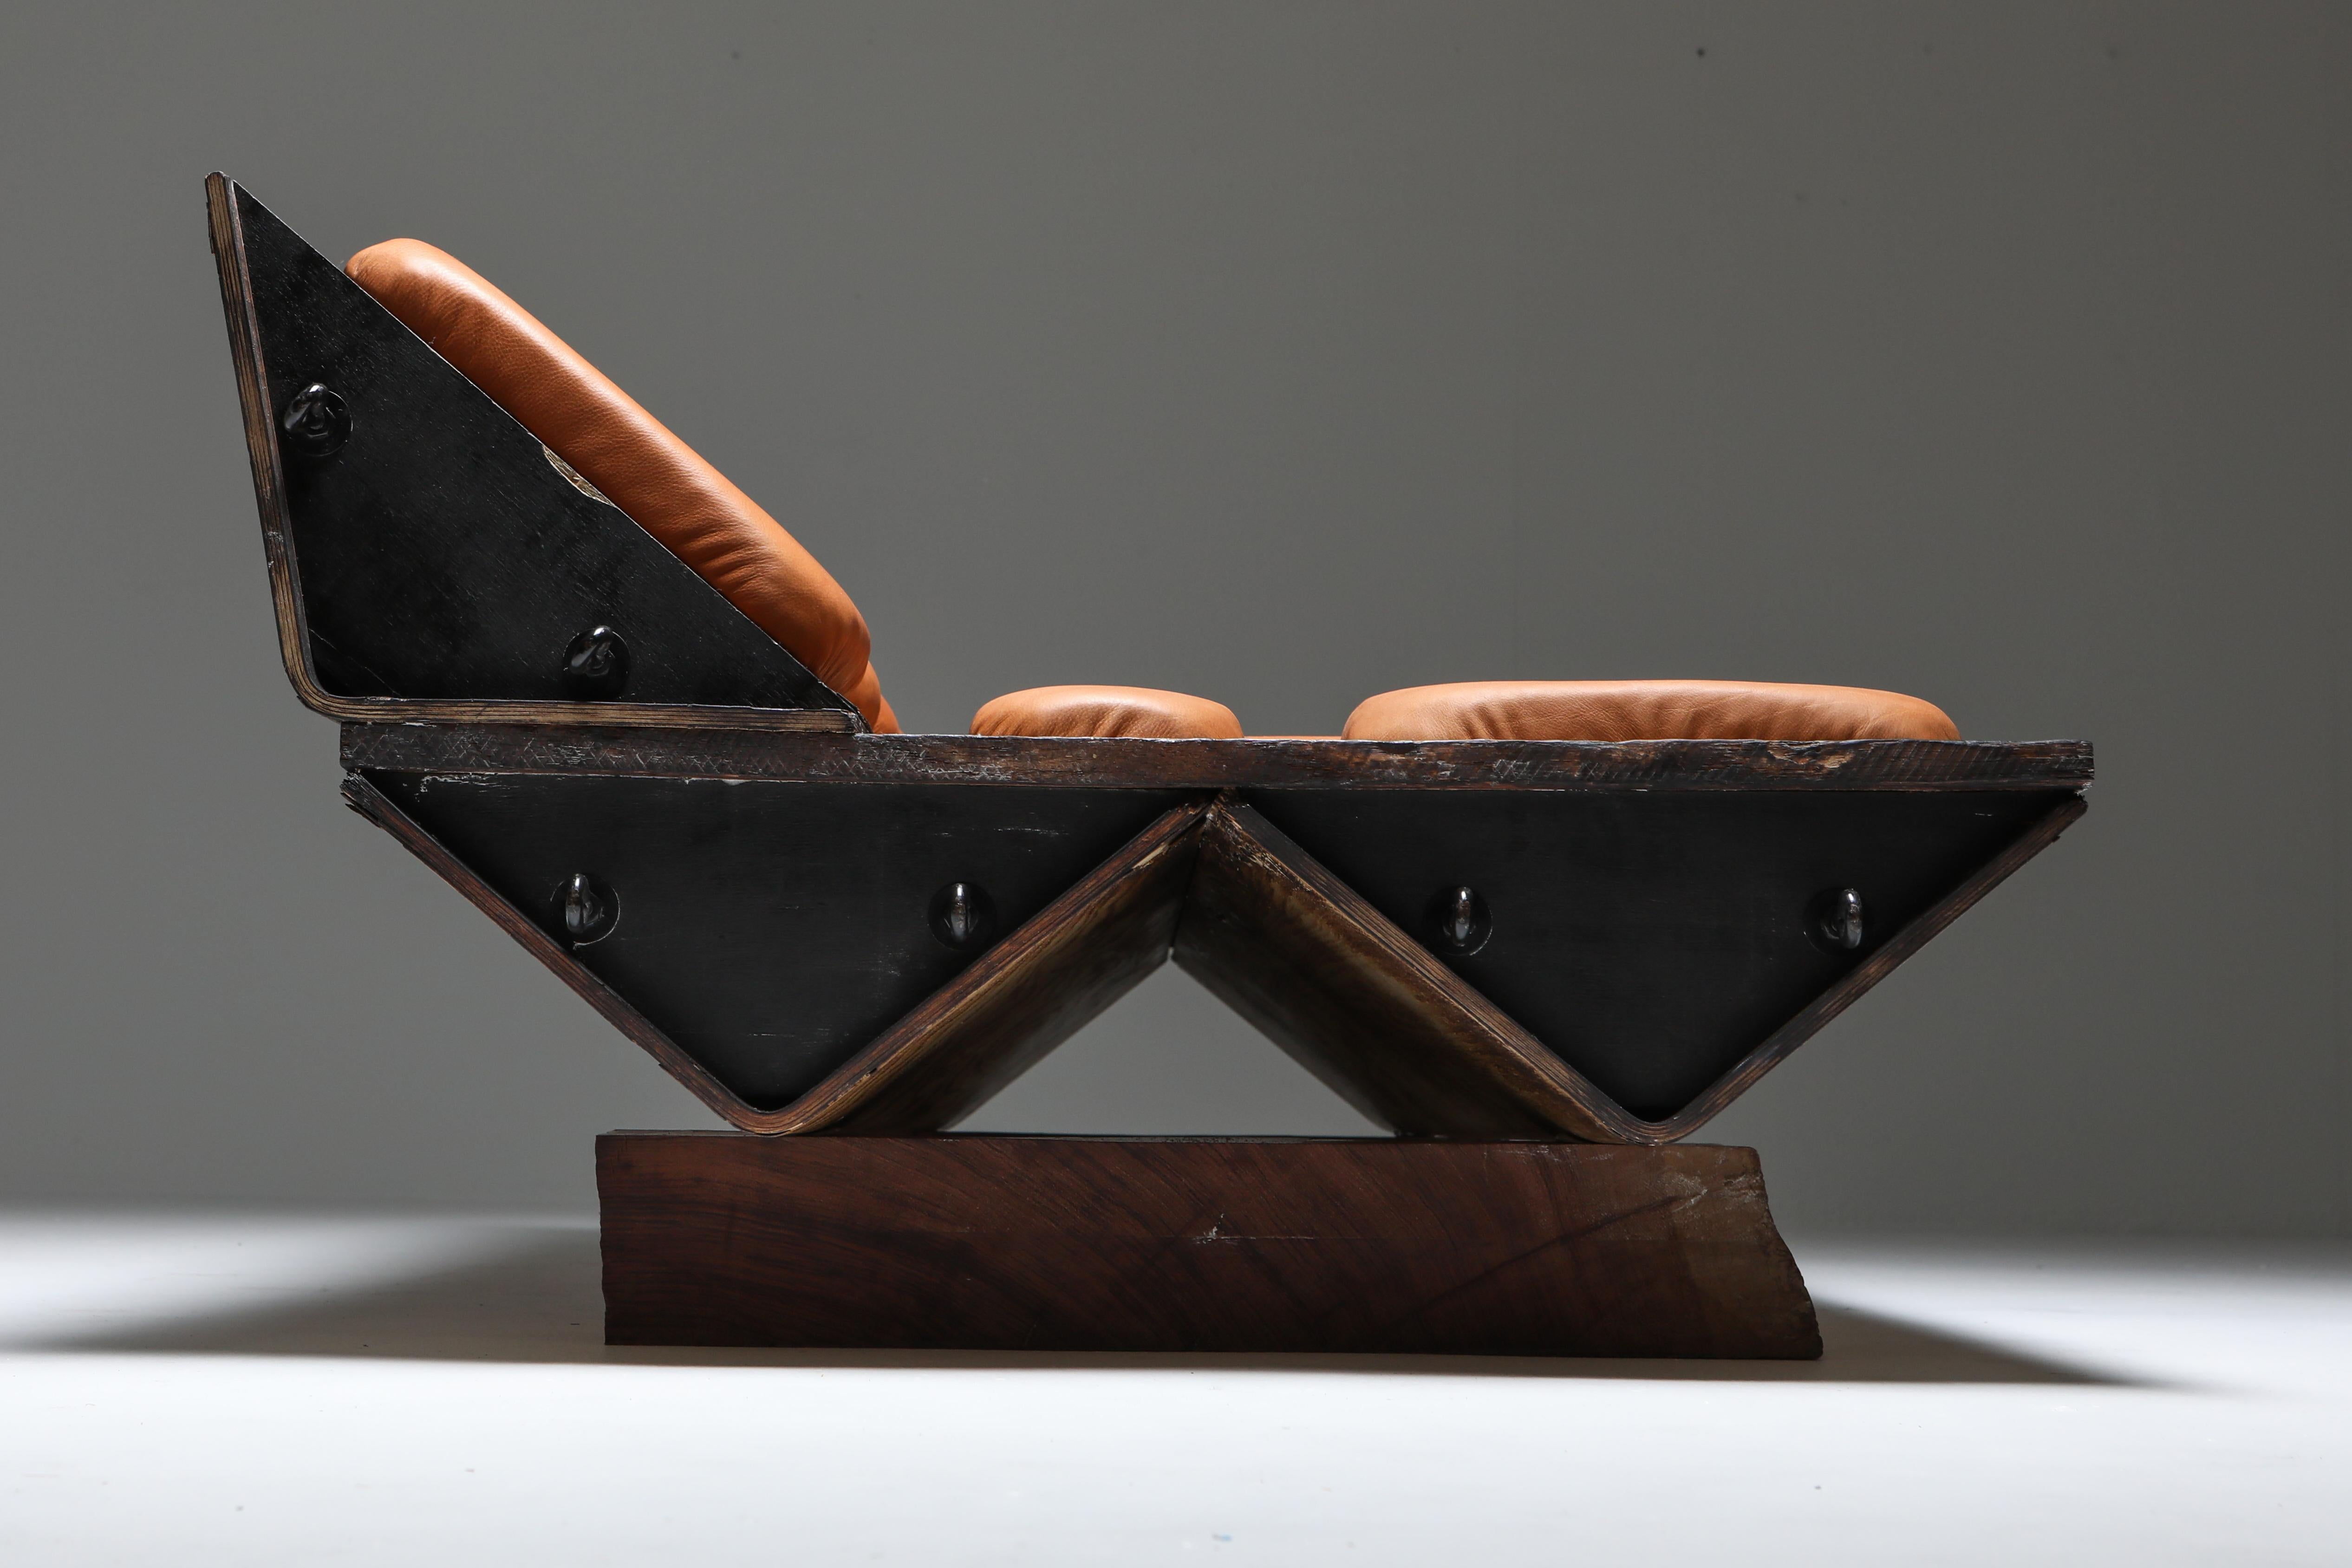 'I Studebaker' Assemblage Bench with Wooden and Leather Elements, Lionel Jadot For Sale 4